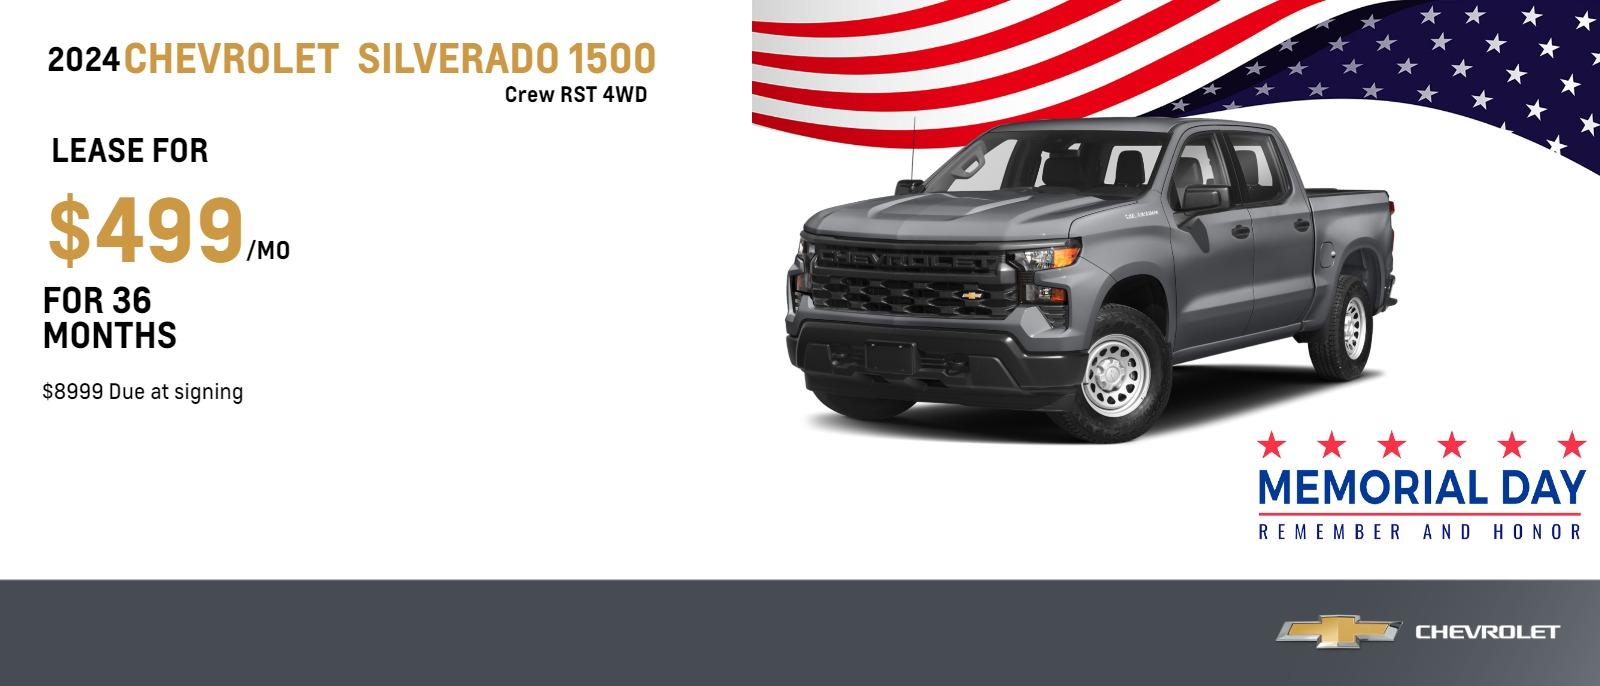 2024 Chevrolet Silverado 1500 Crew RST 4WD

$499 Month Lease | 36 Months | $8999 Due at signing